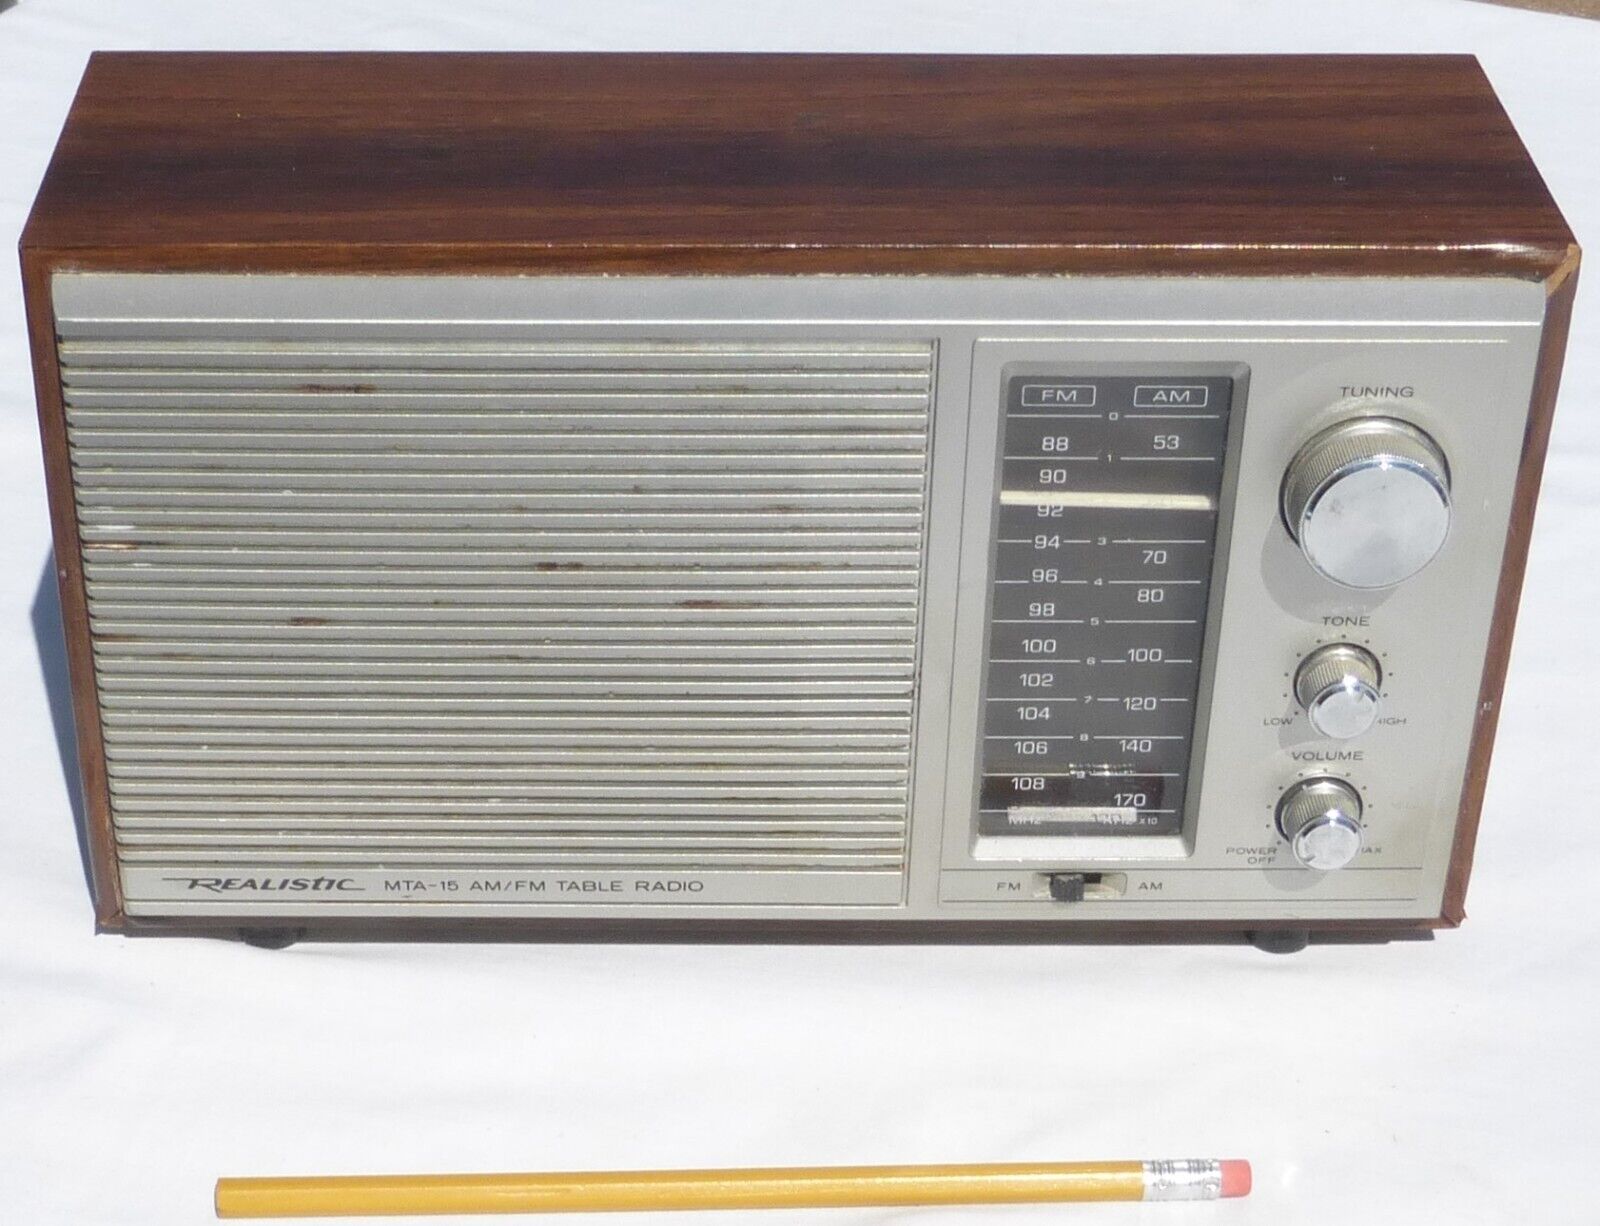 Realistic MTA-15 AM/FM Table Radio 12-695 Cleaned/Tested/Works Perfect